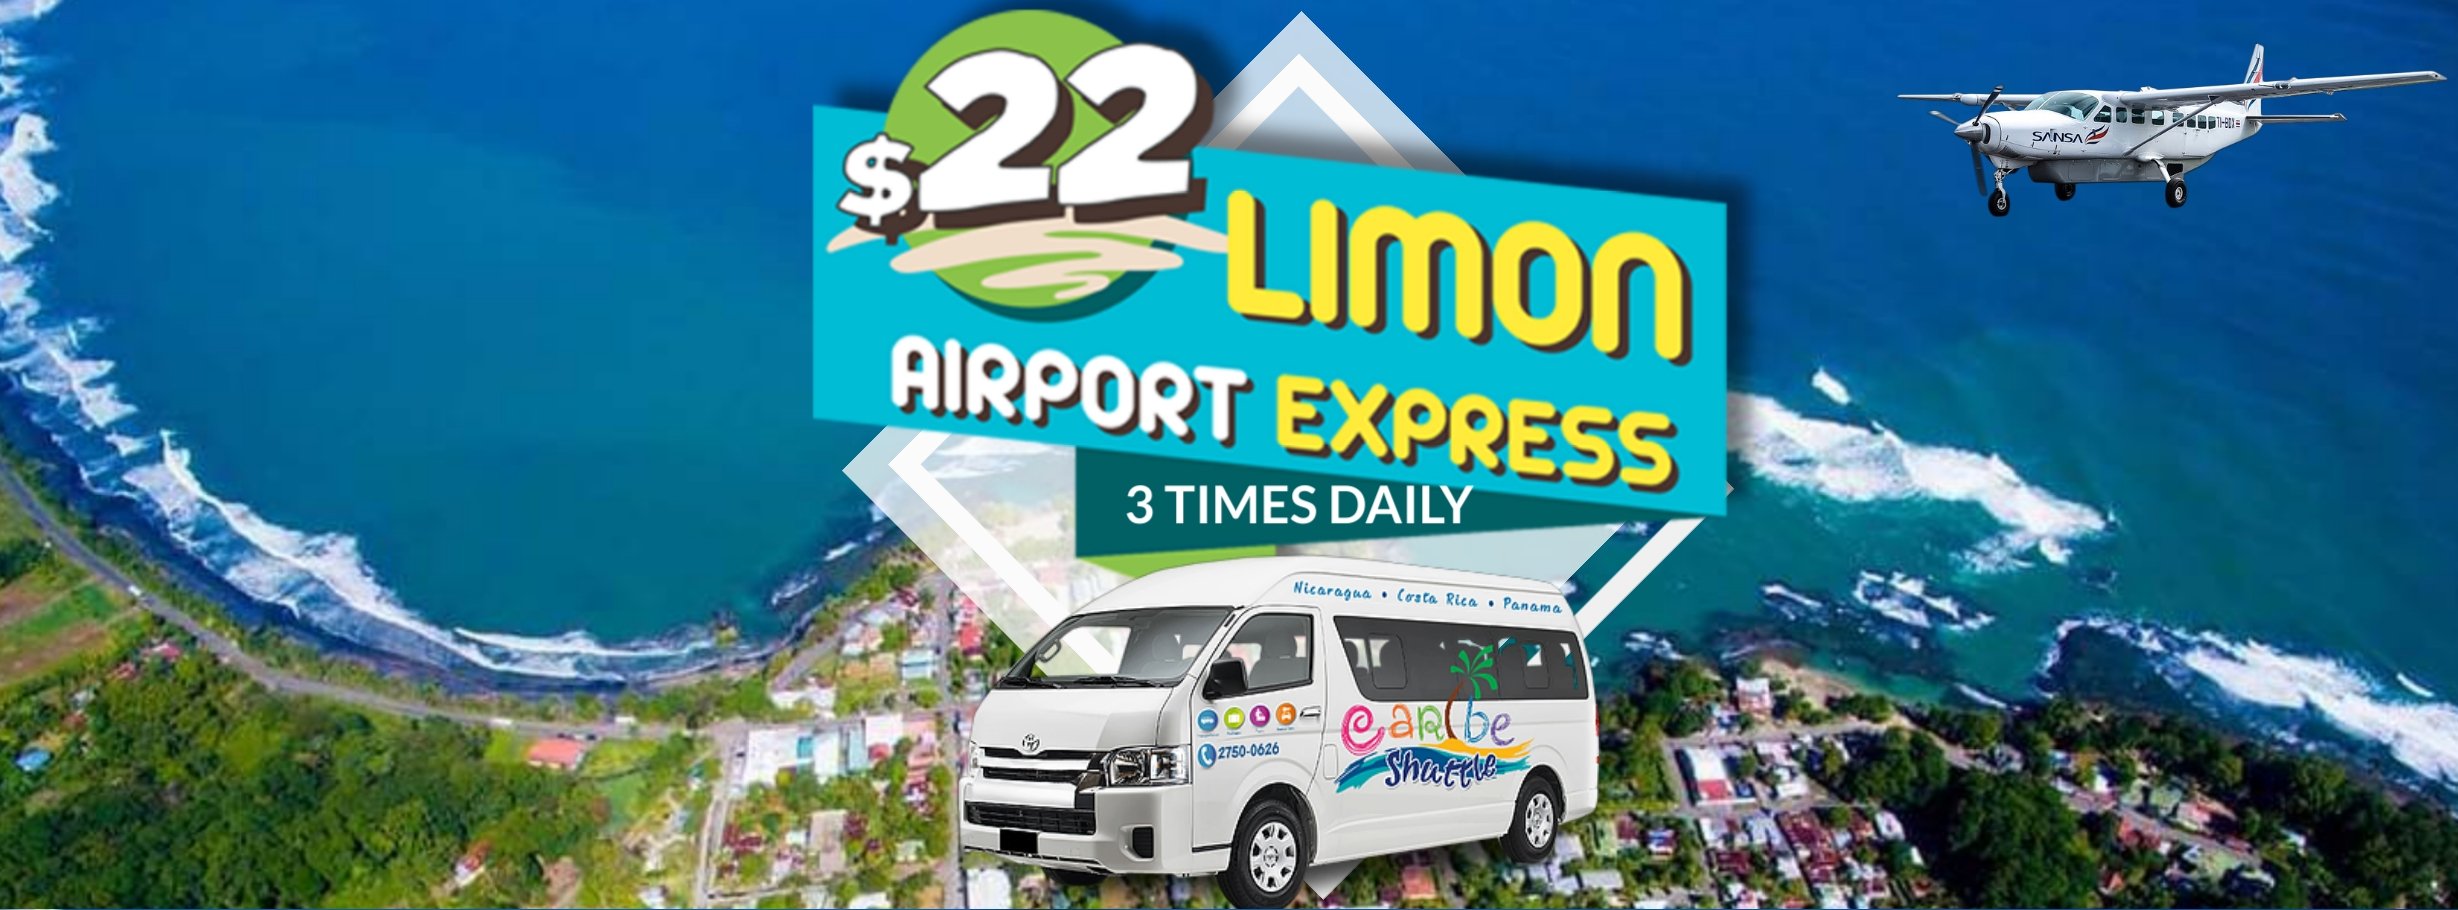 Caribe-Shuttle-Limon-Airport-Express